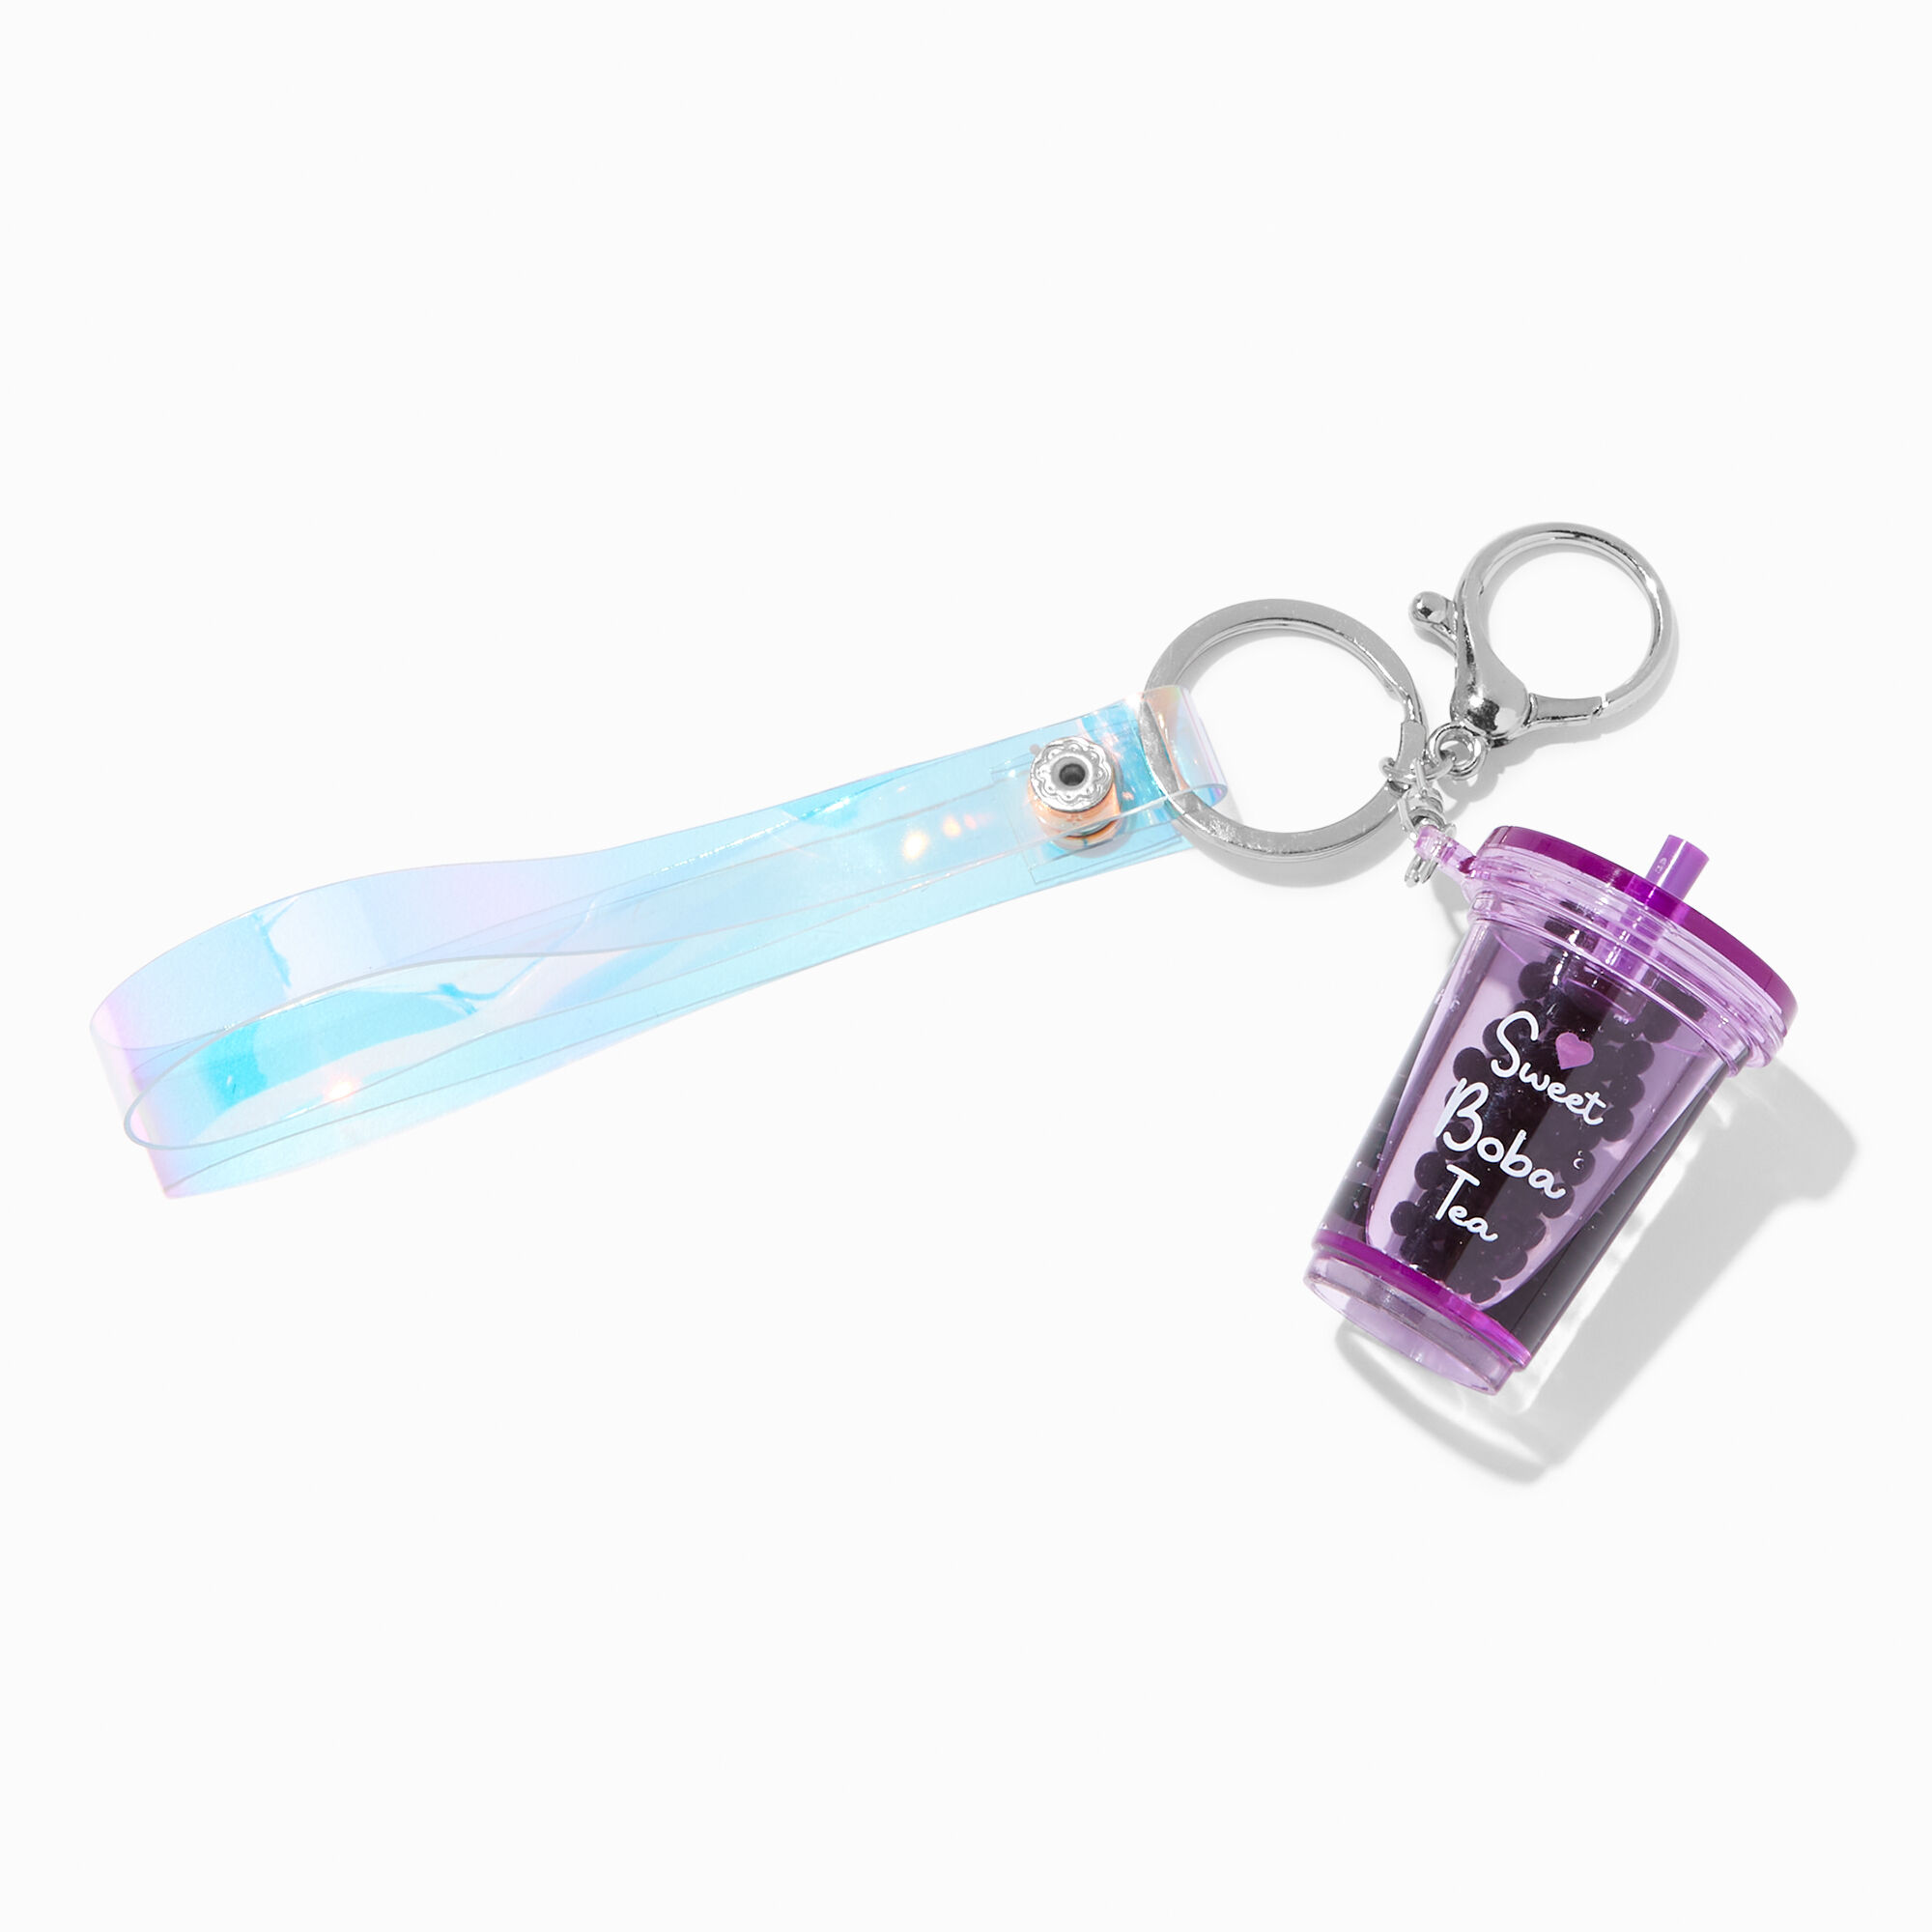 View Claires Holographic Boba Tea Liquid Fill Keyring Silver information